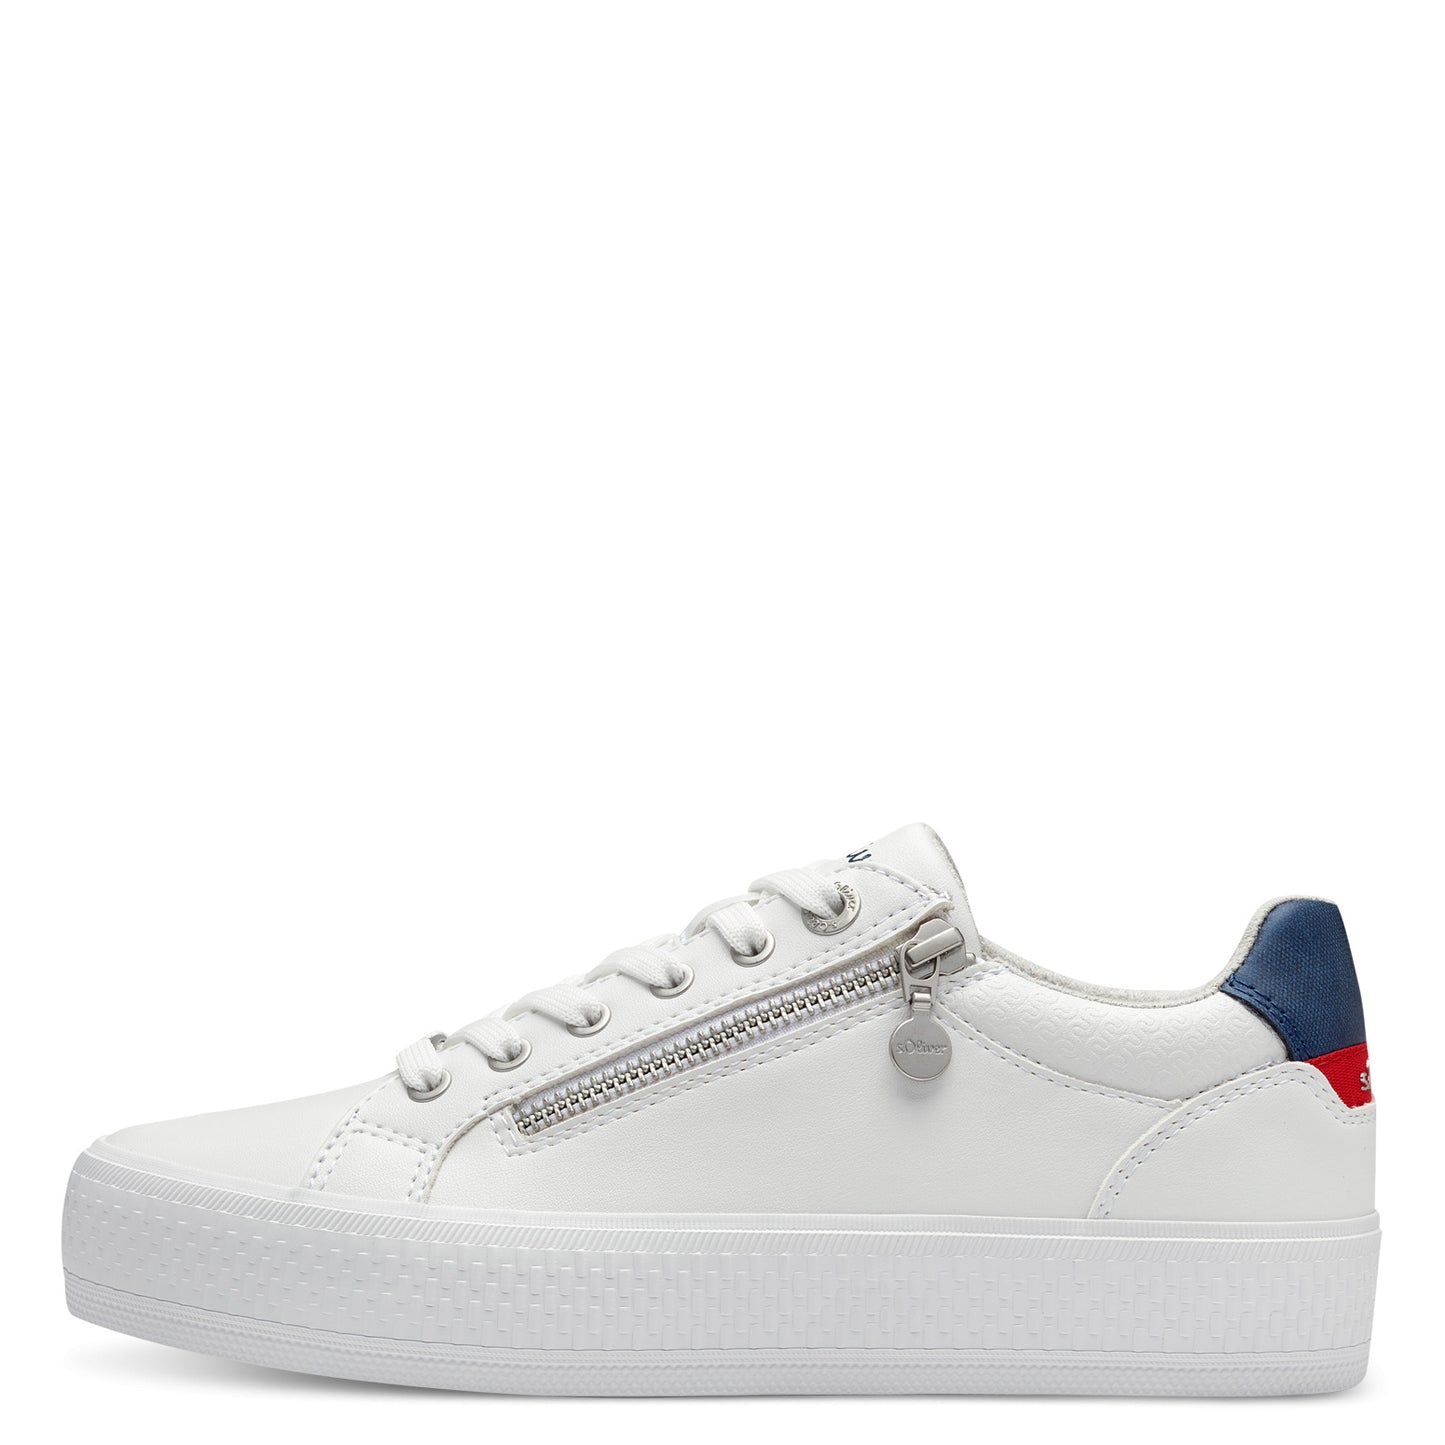 S.oliver - Ladies Shoes Trainers White, Navy (1910)